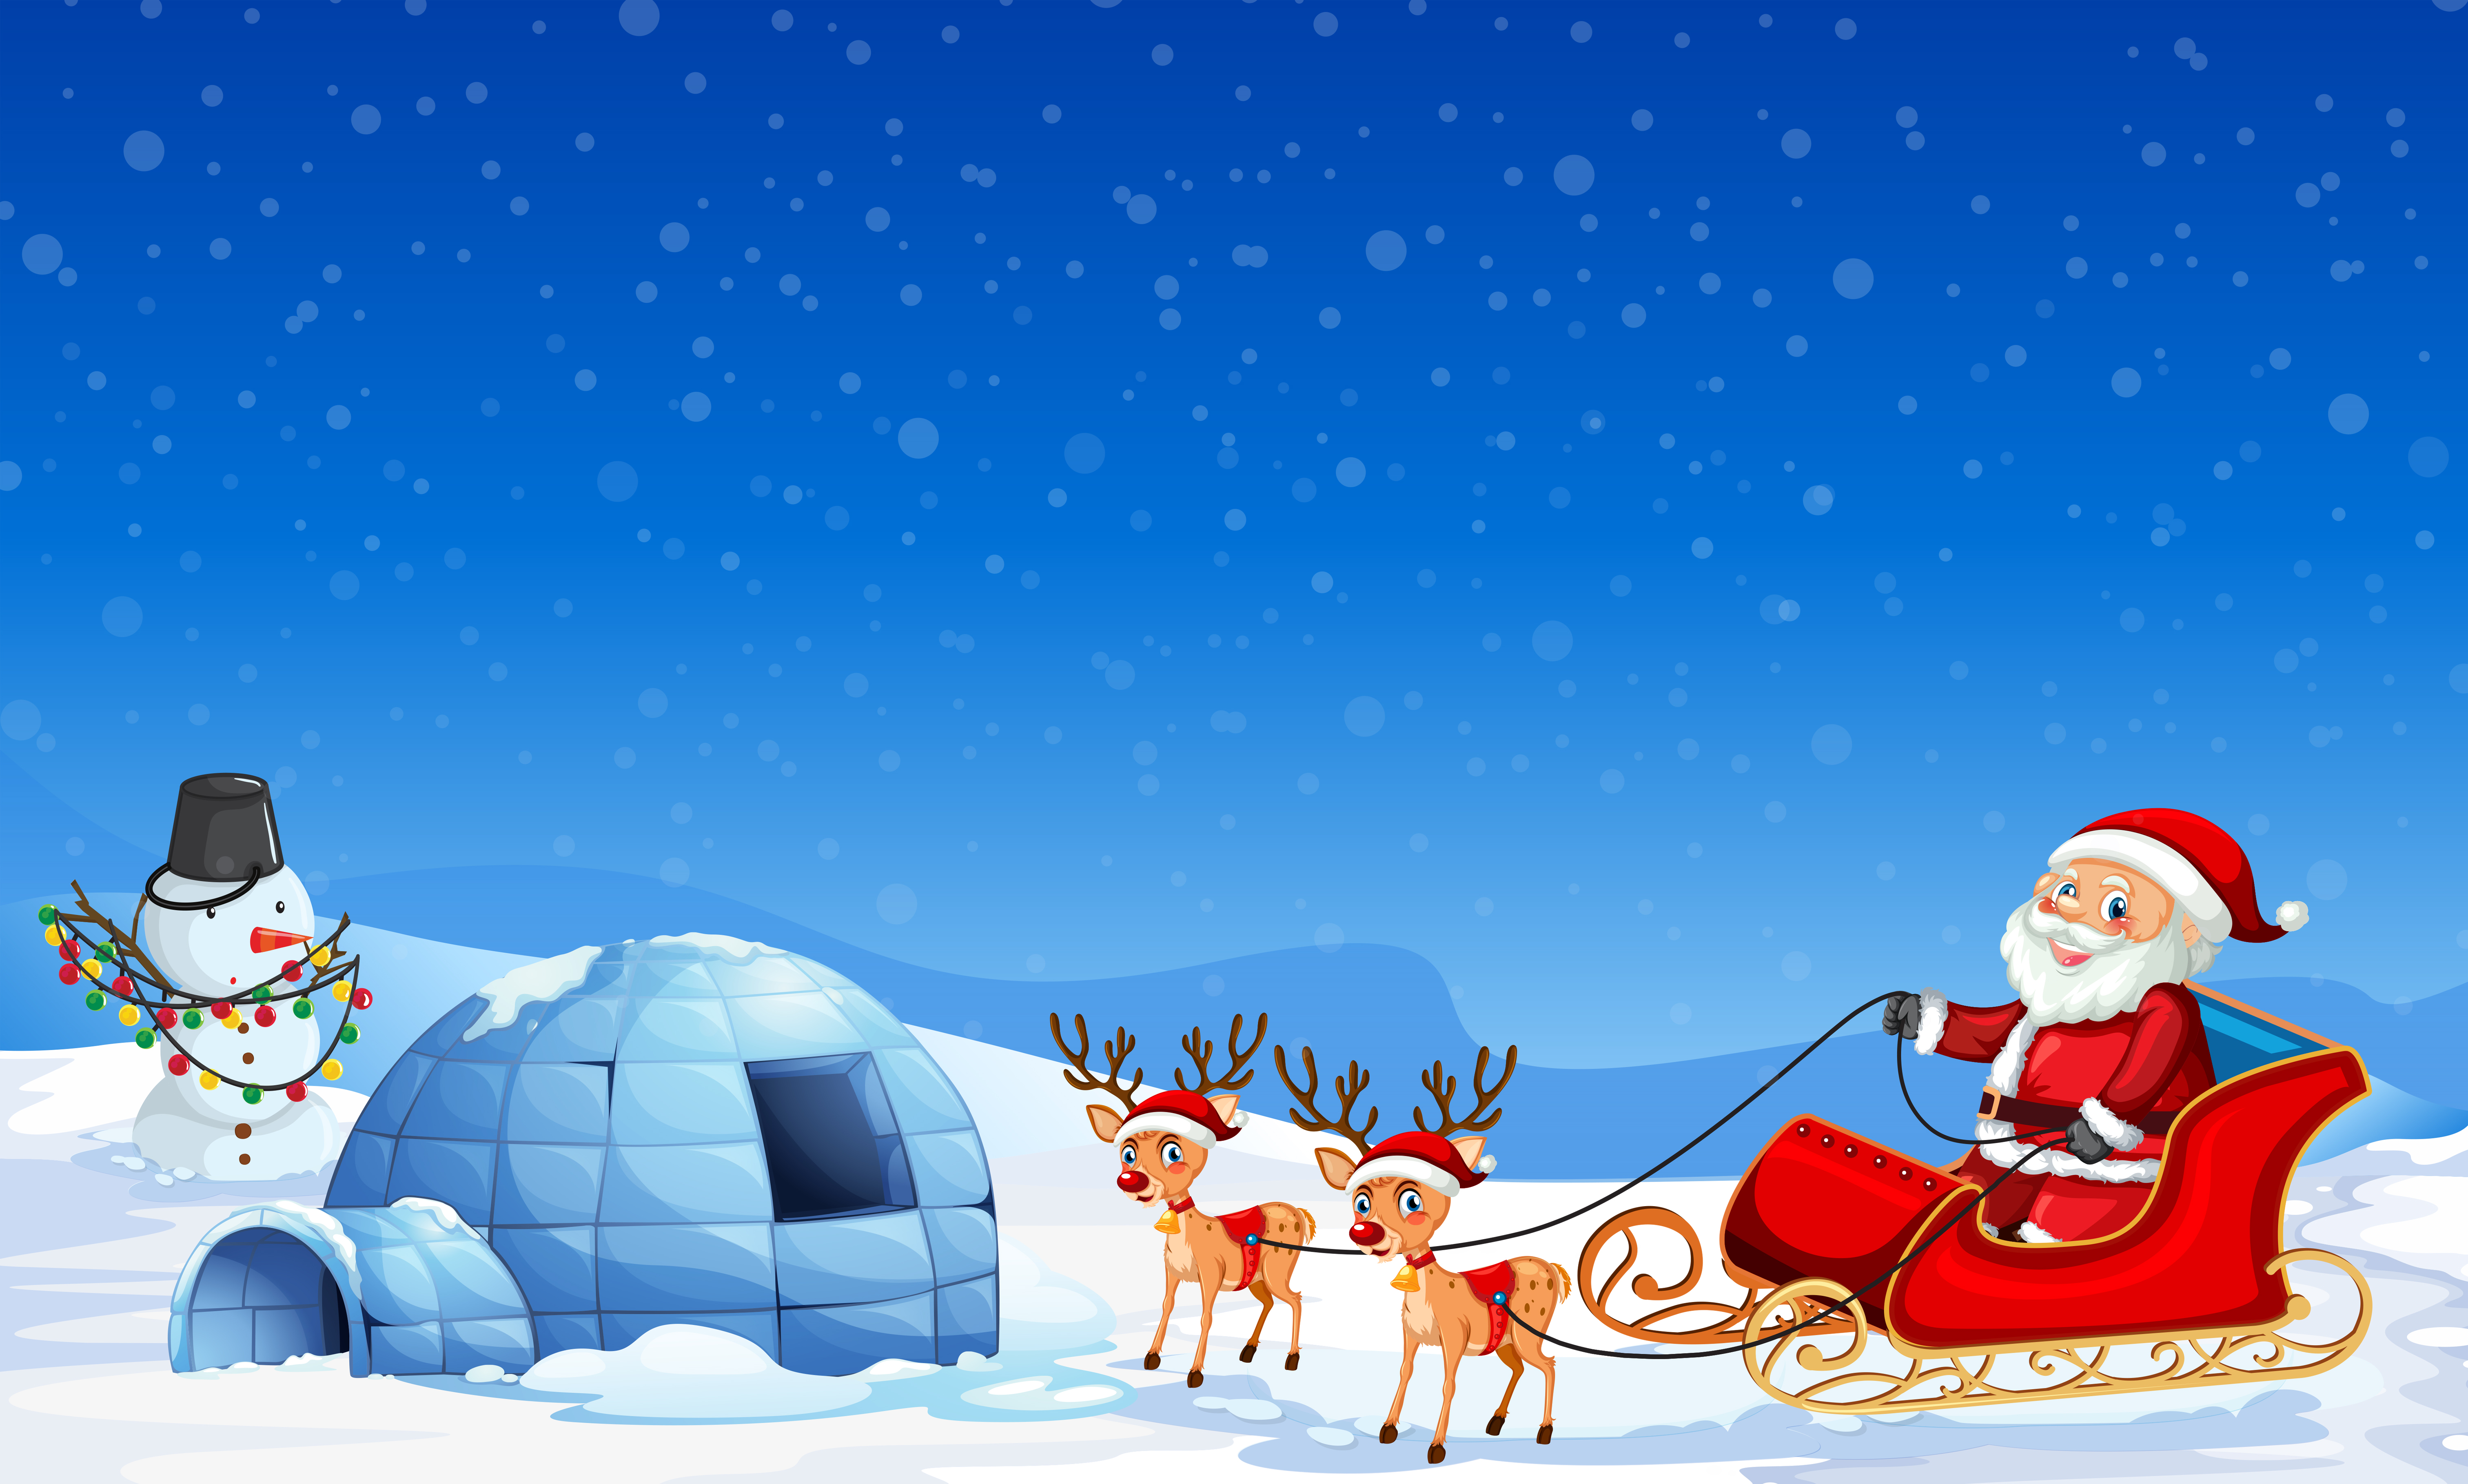 Ice house and traveling santa claus ppt slide 